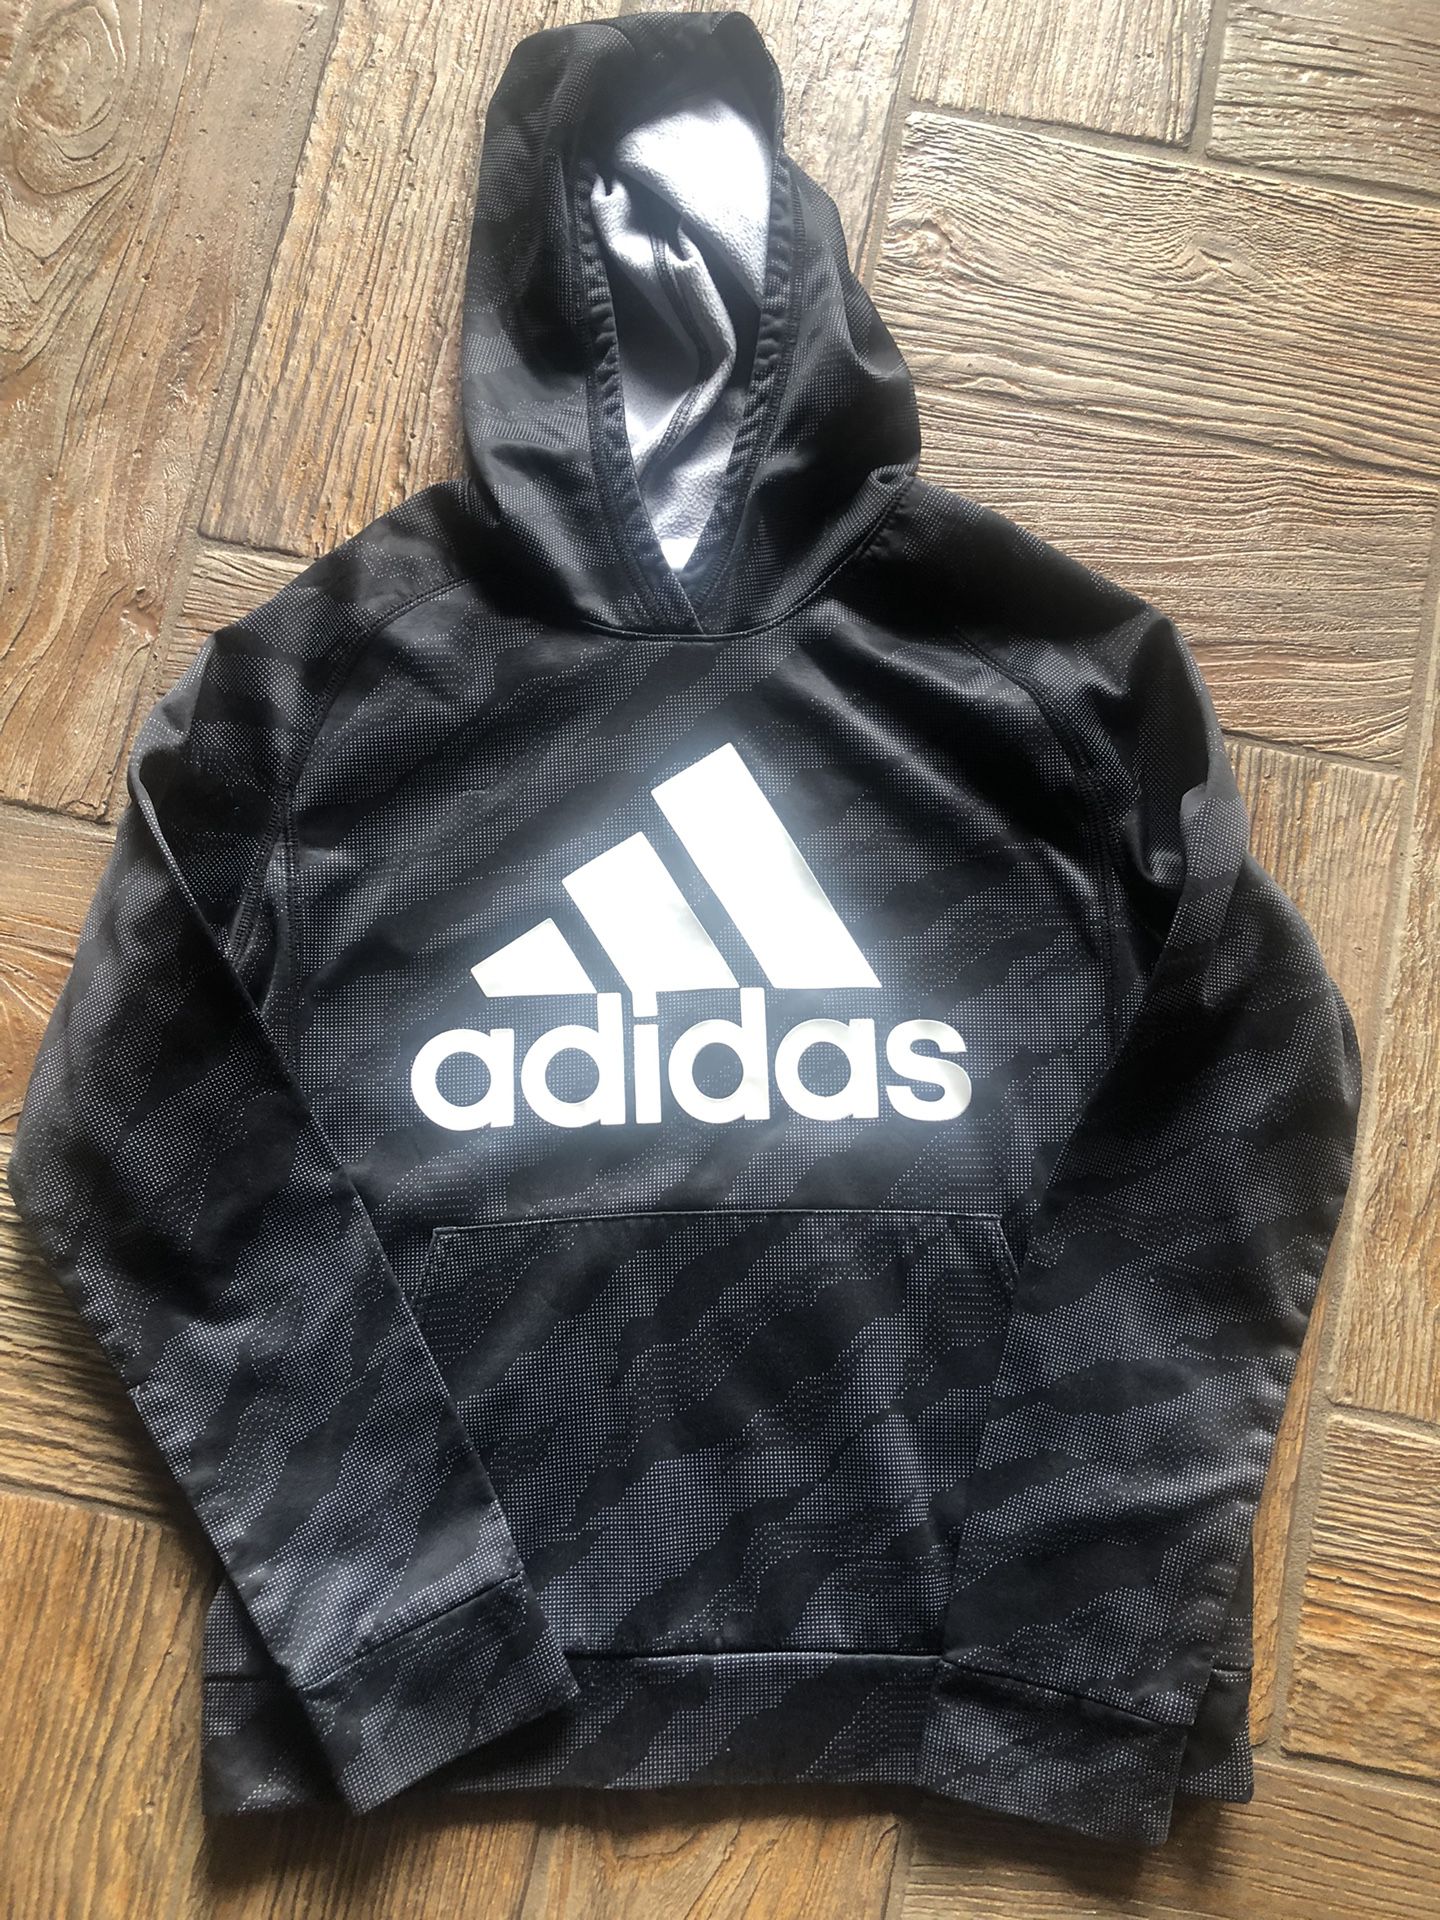 Adidas Youth Size Large Hoodie